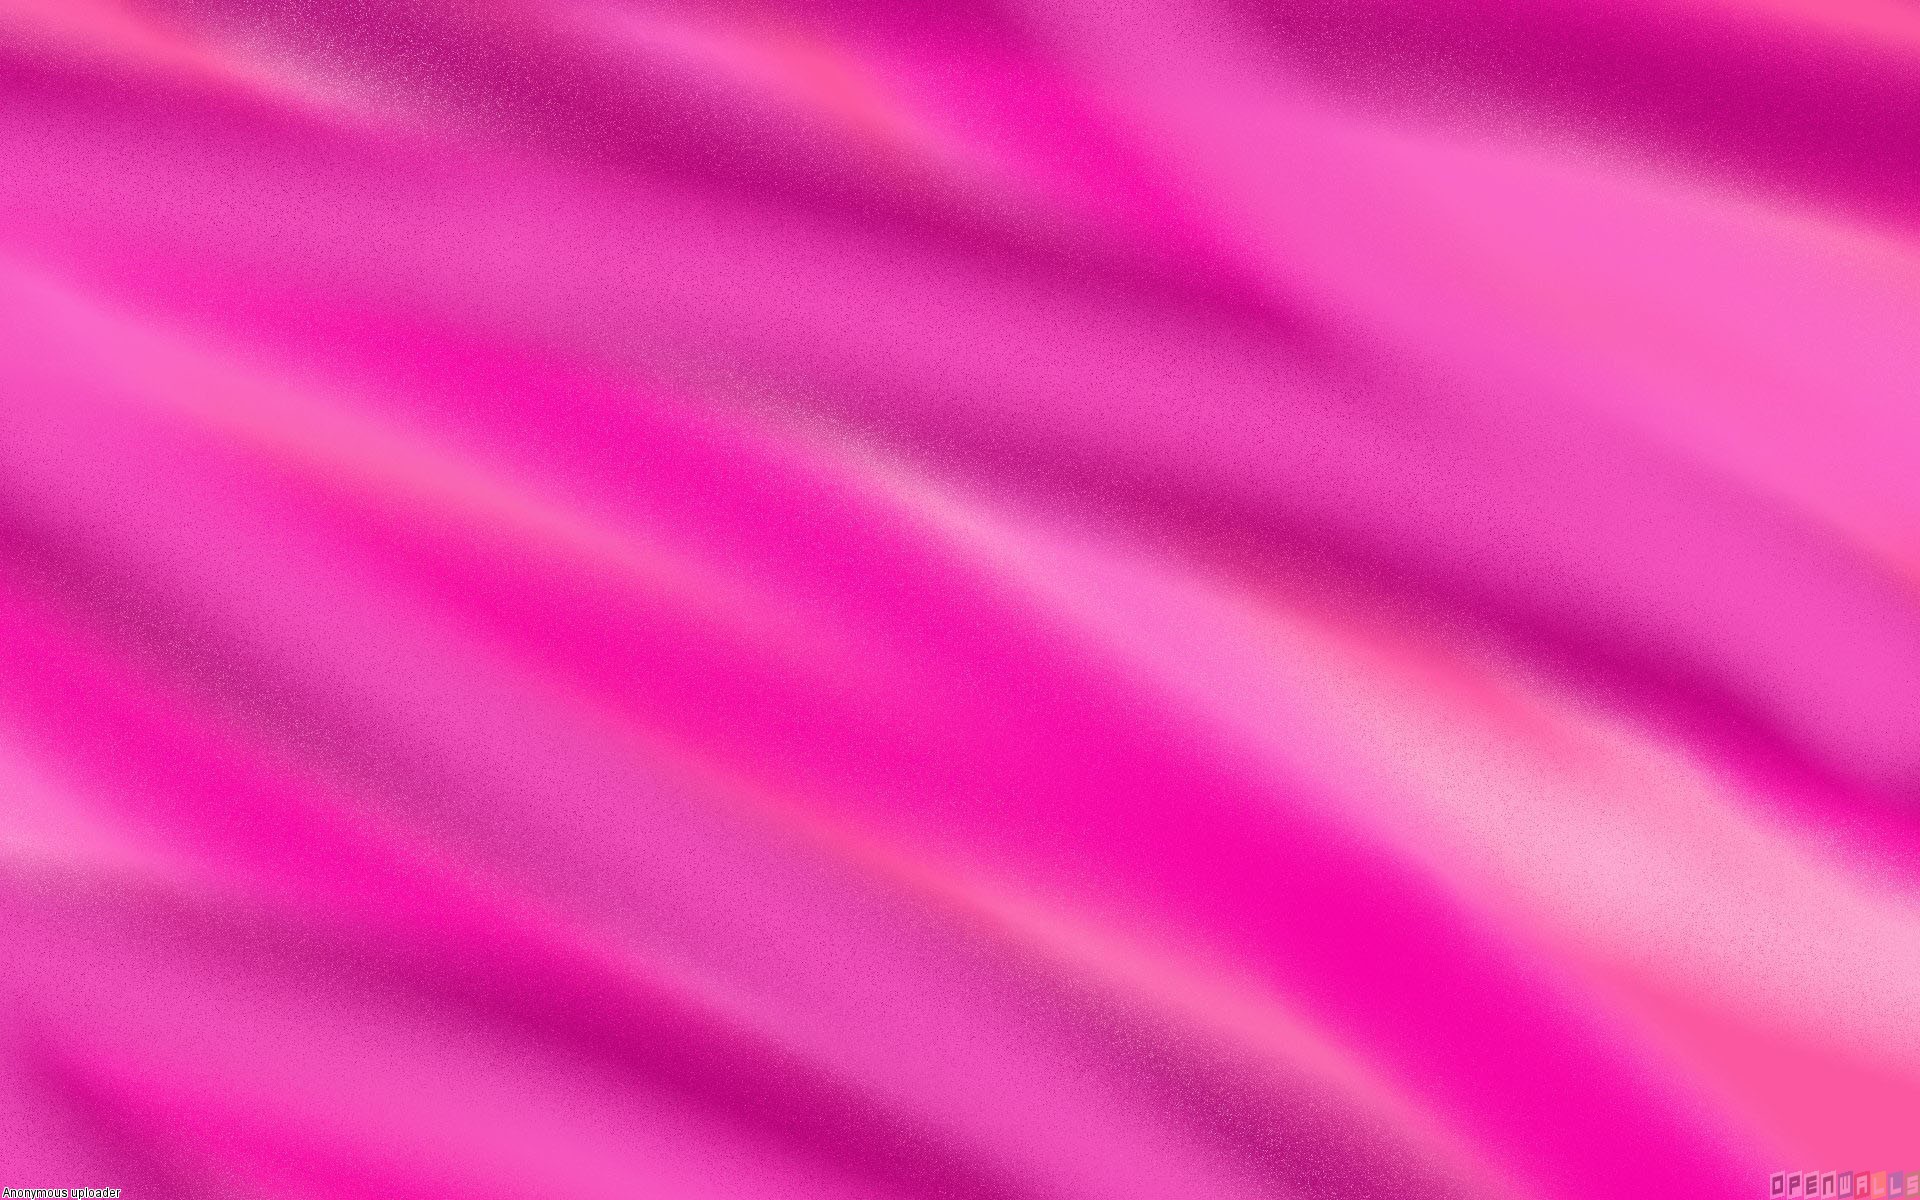 Pink background wallpapers - Open Walls